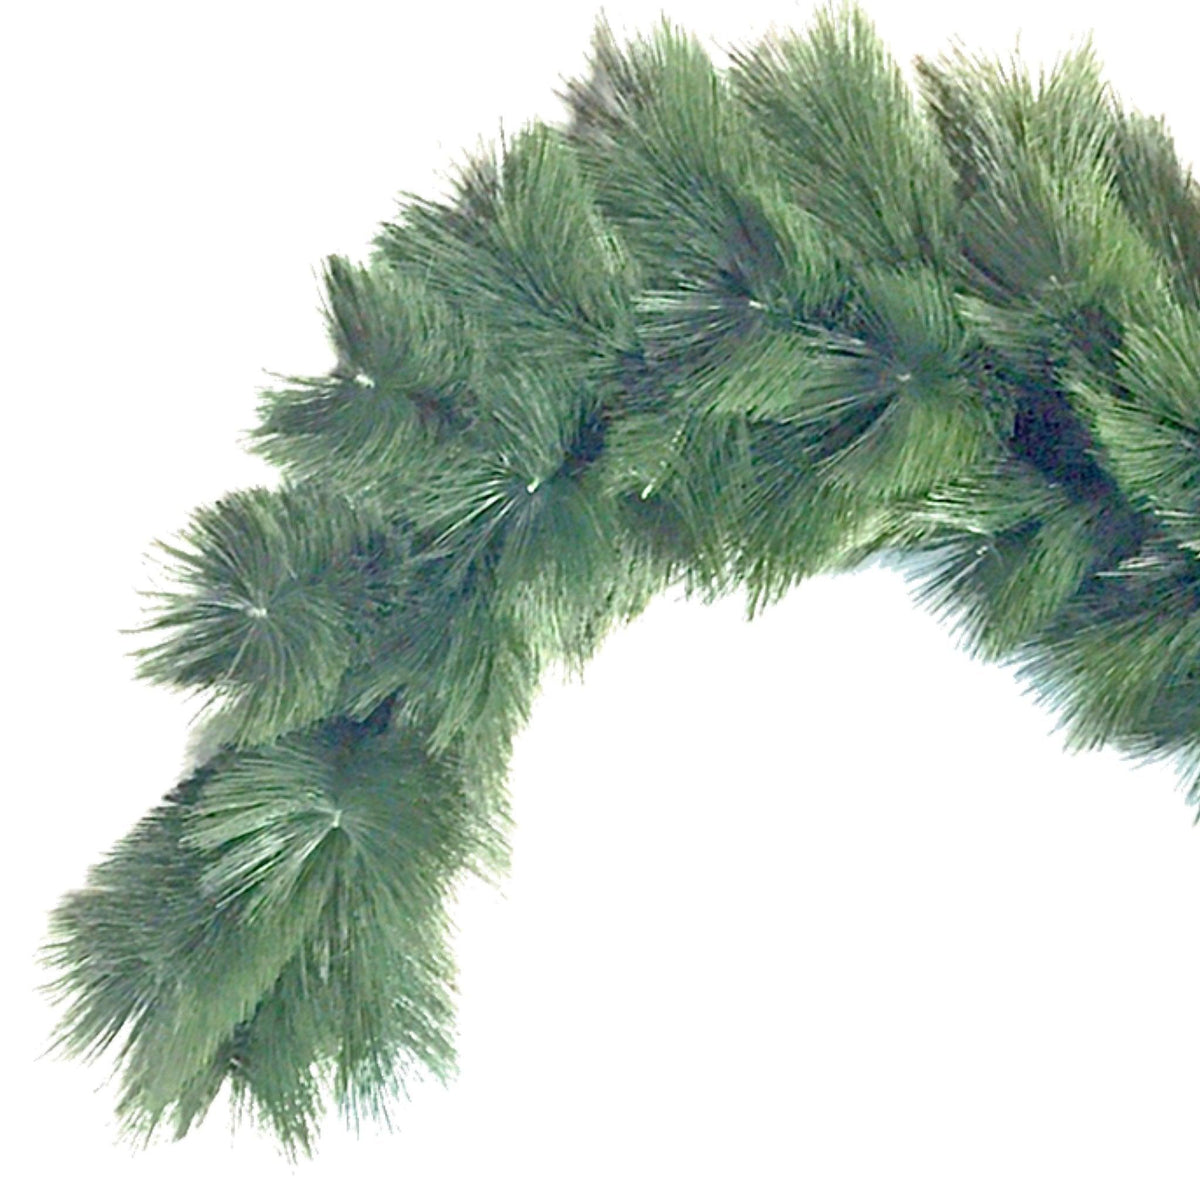 Introducing Lee Display's professional Christmas Garland Deluxe with Green Pine Needle Brush.  Comes in 6FT Lengths with options for Pre-Lit.  Shop now with Lee Display